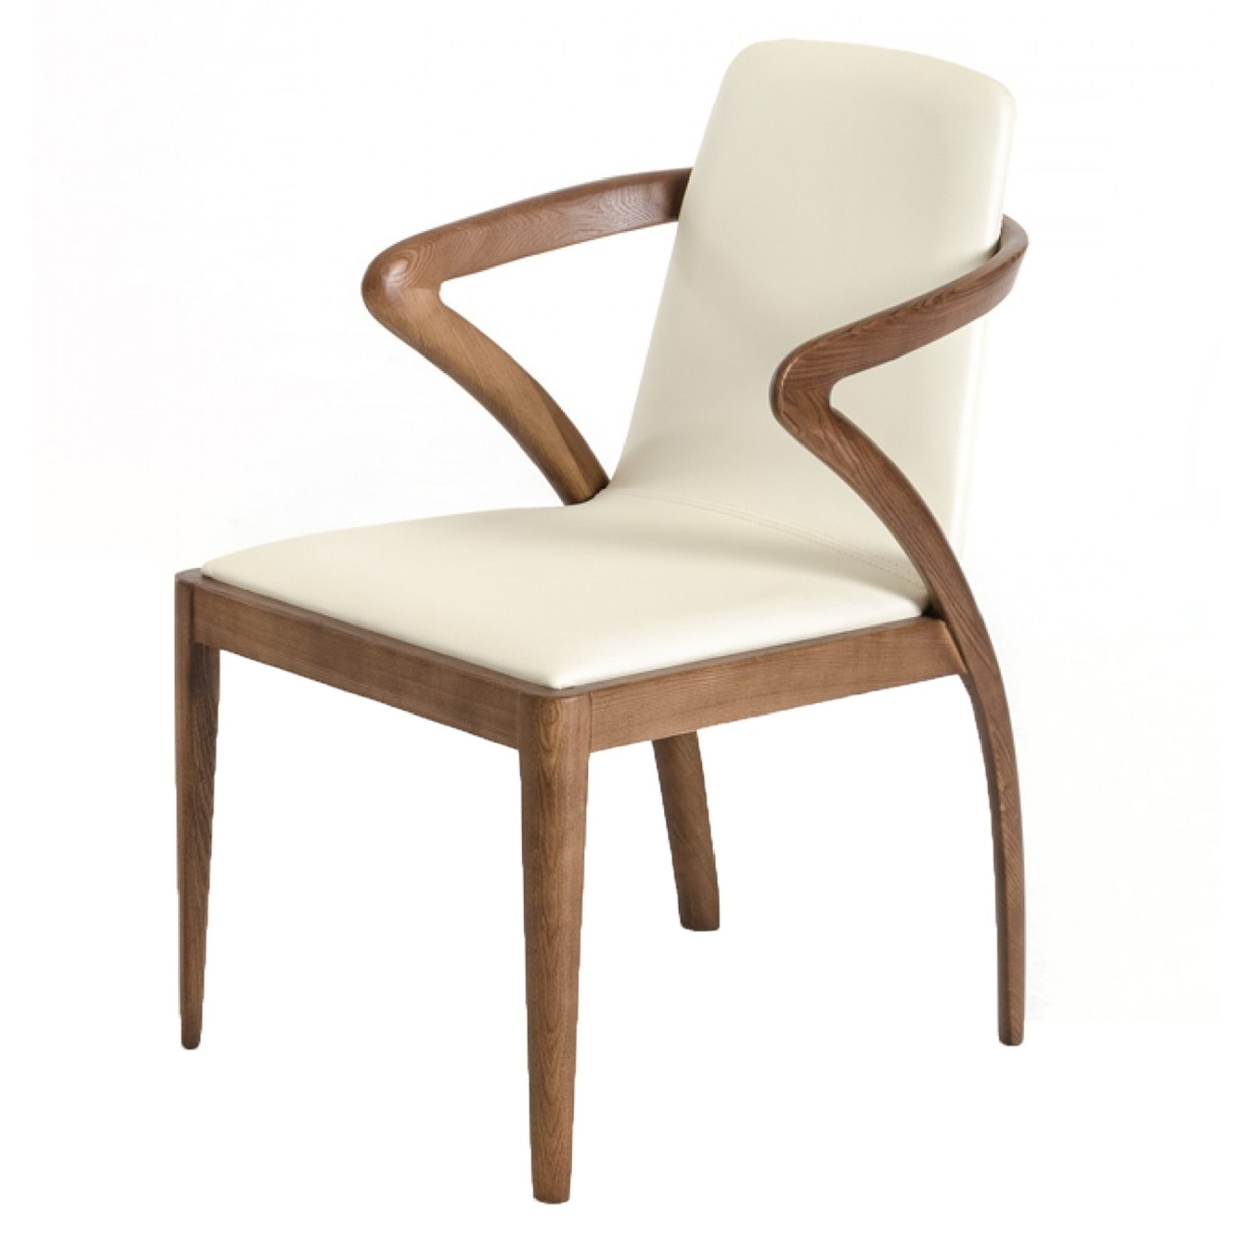 Leatherette Dining Chair With Curved Legs And Armrest, Cream And Brown- Saltoro Sherpi